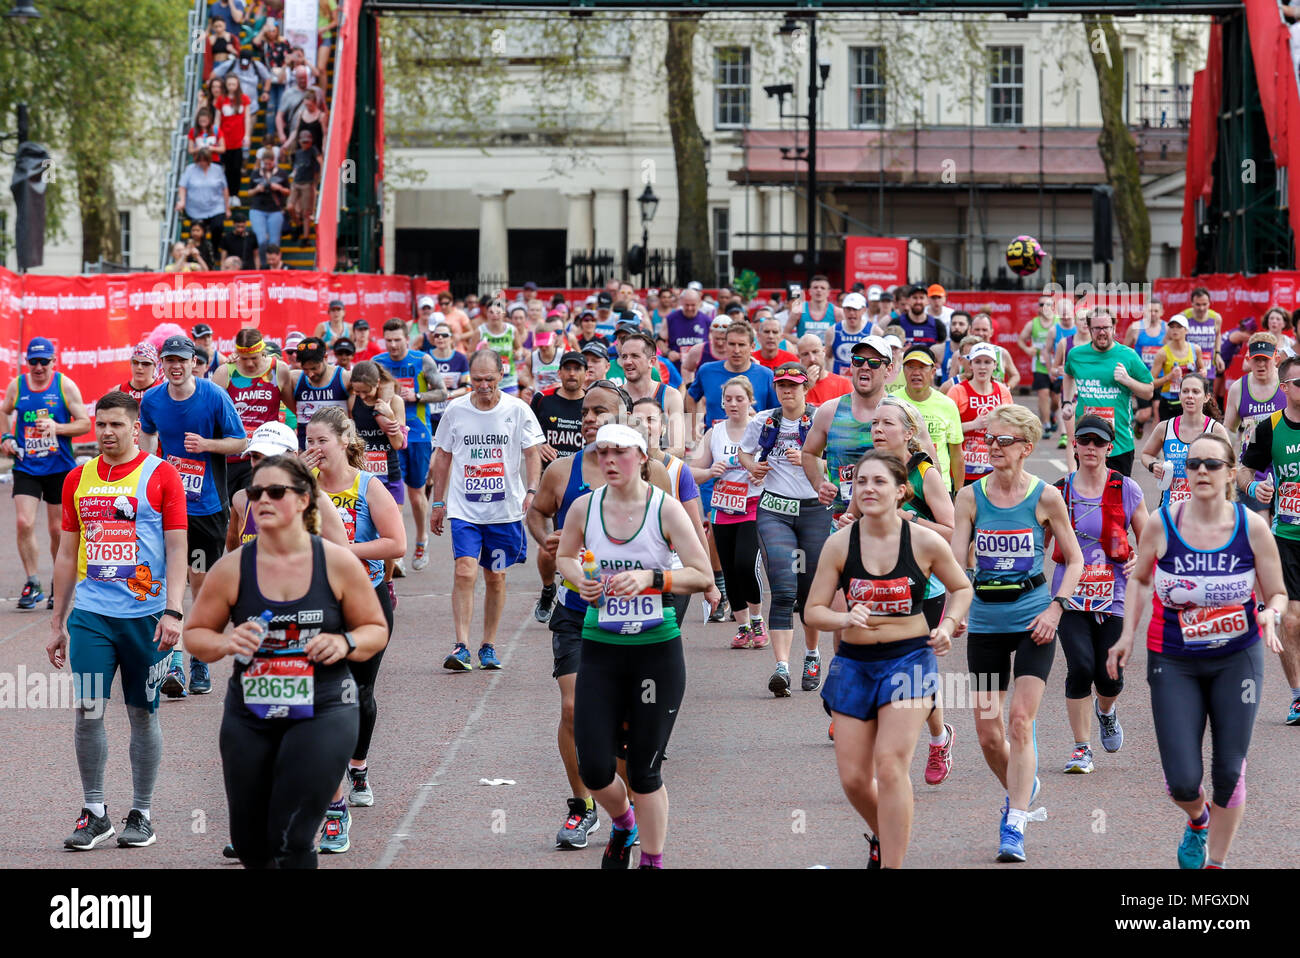 Runners of the Mass race during the Virgin Money London Marathon in London, England on April 22, 2018. Stock Photo